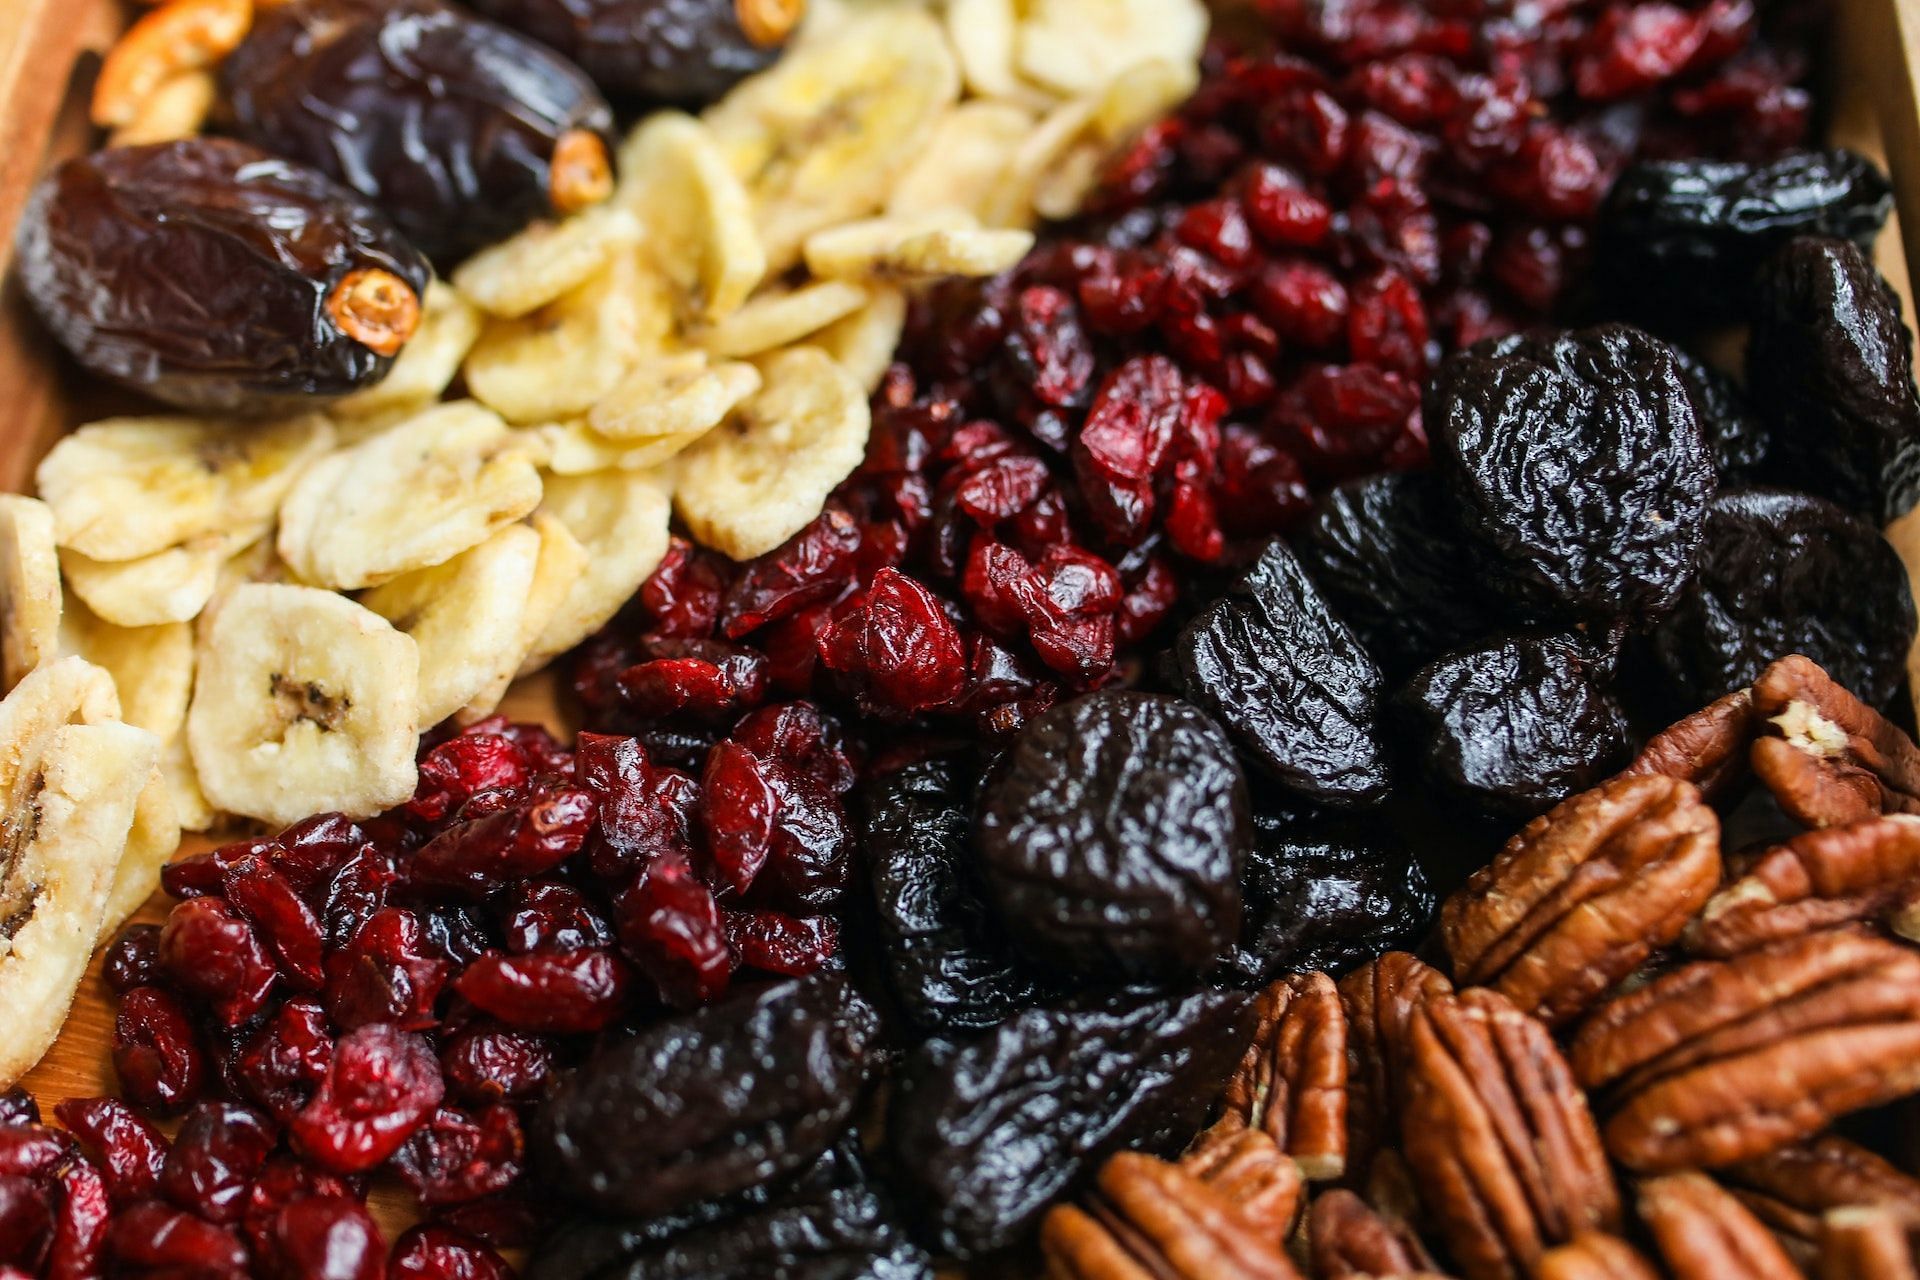 Certain fruits and dried fruits are also considered a great source of calcium for vegans. (Photo via Pexels/Polina Tankilevitch)